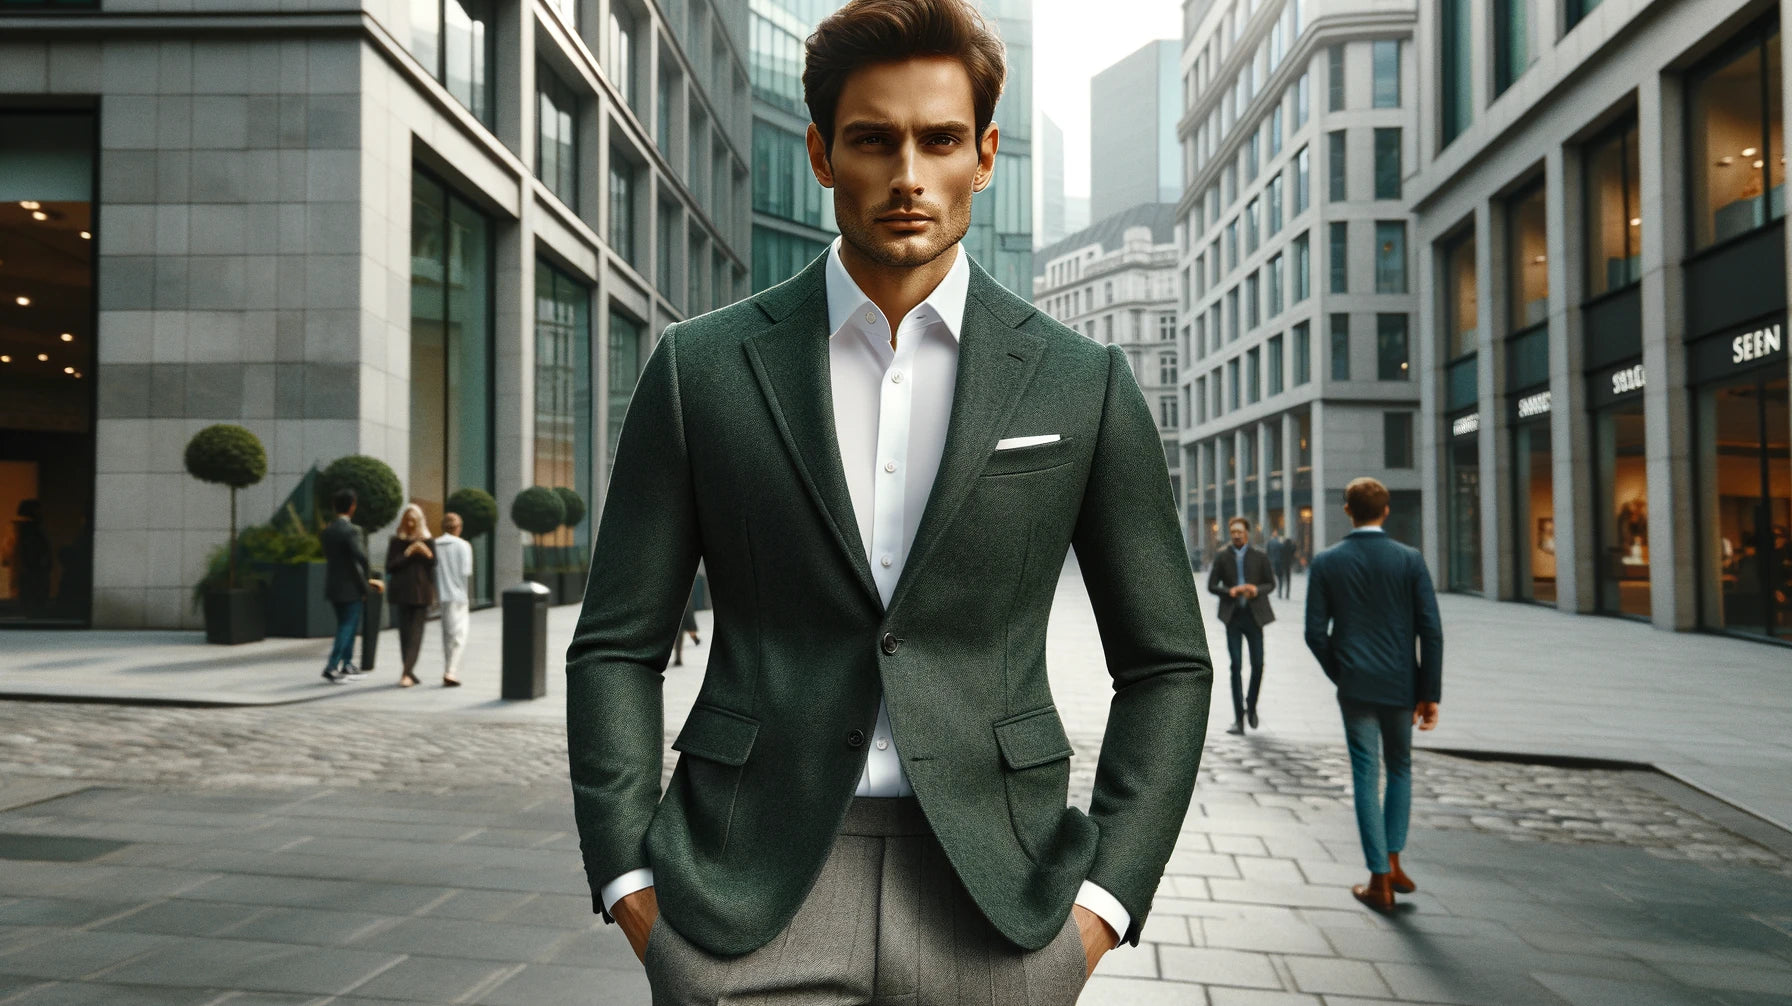 Formal style with a green jacket, blue shirt, and grey flannel trousers